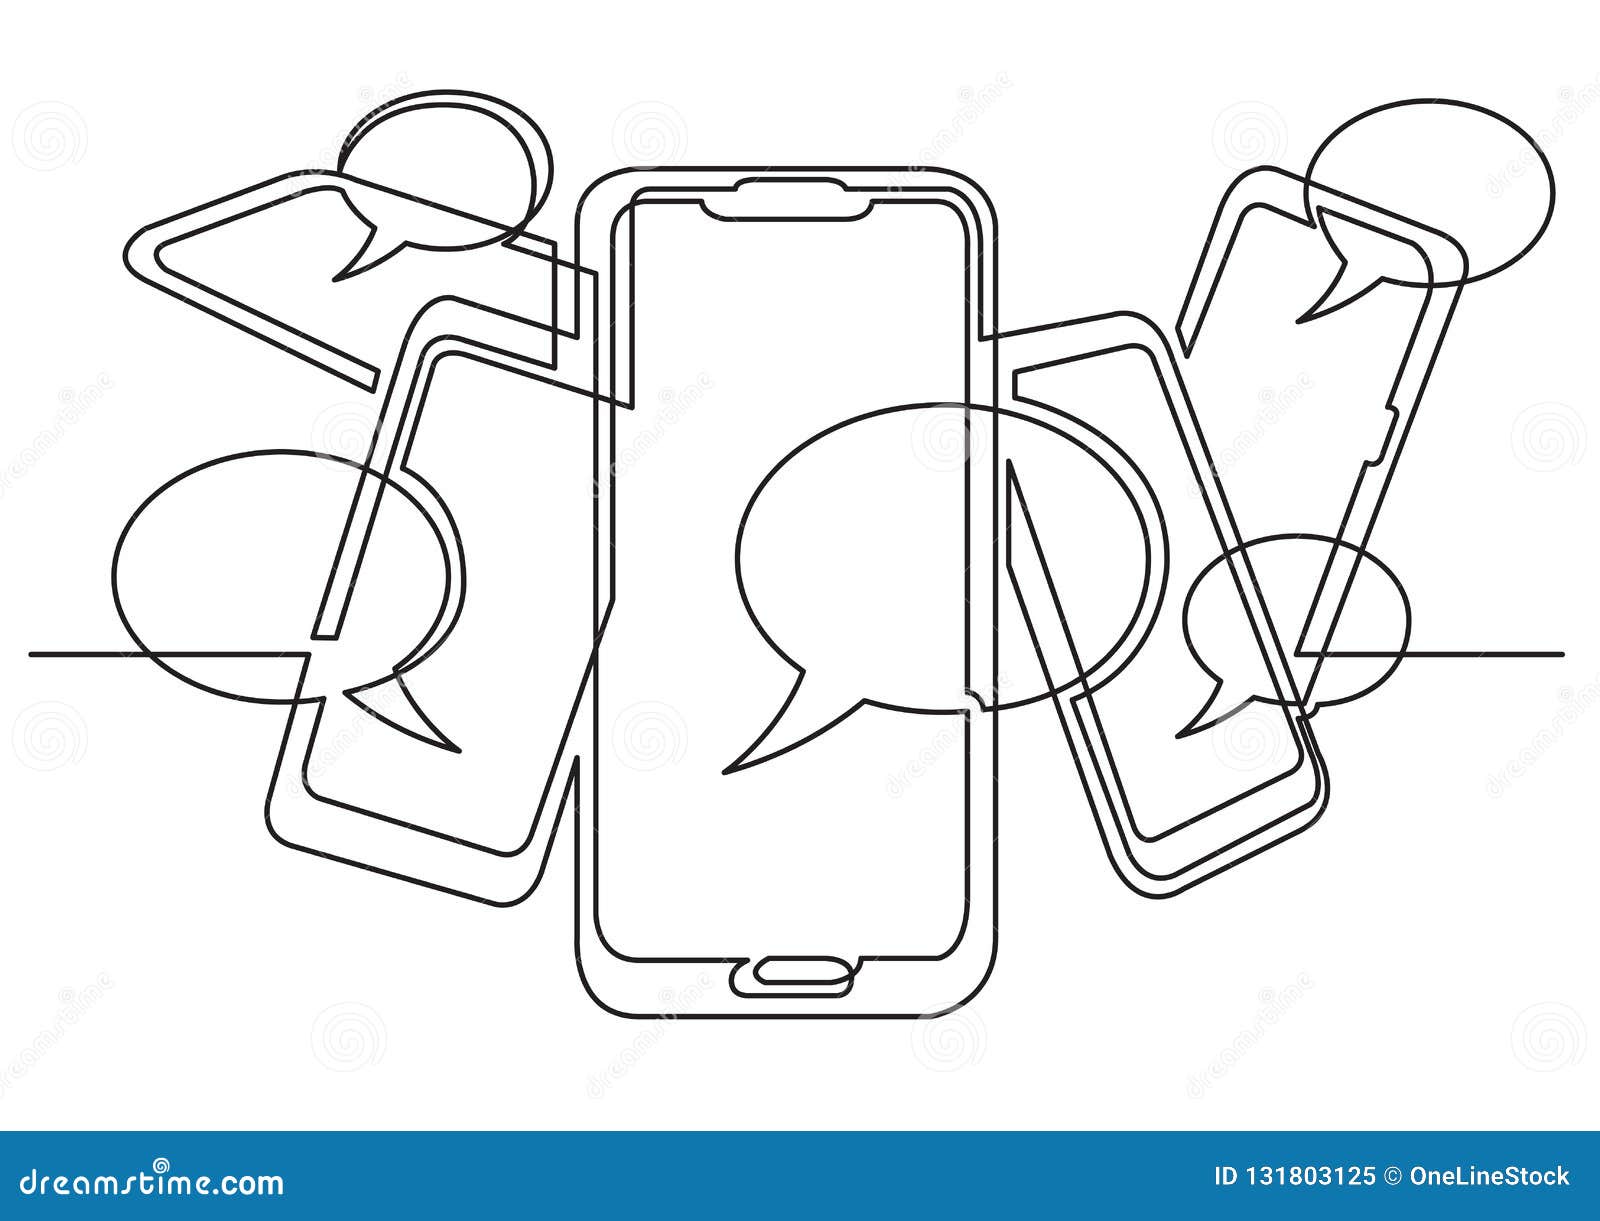 continuous line drawing of social media on mobile phones